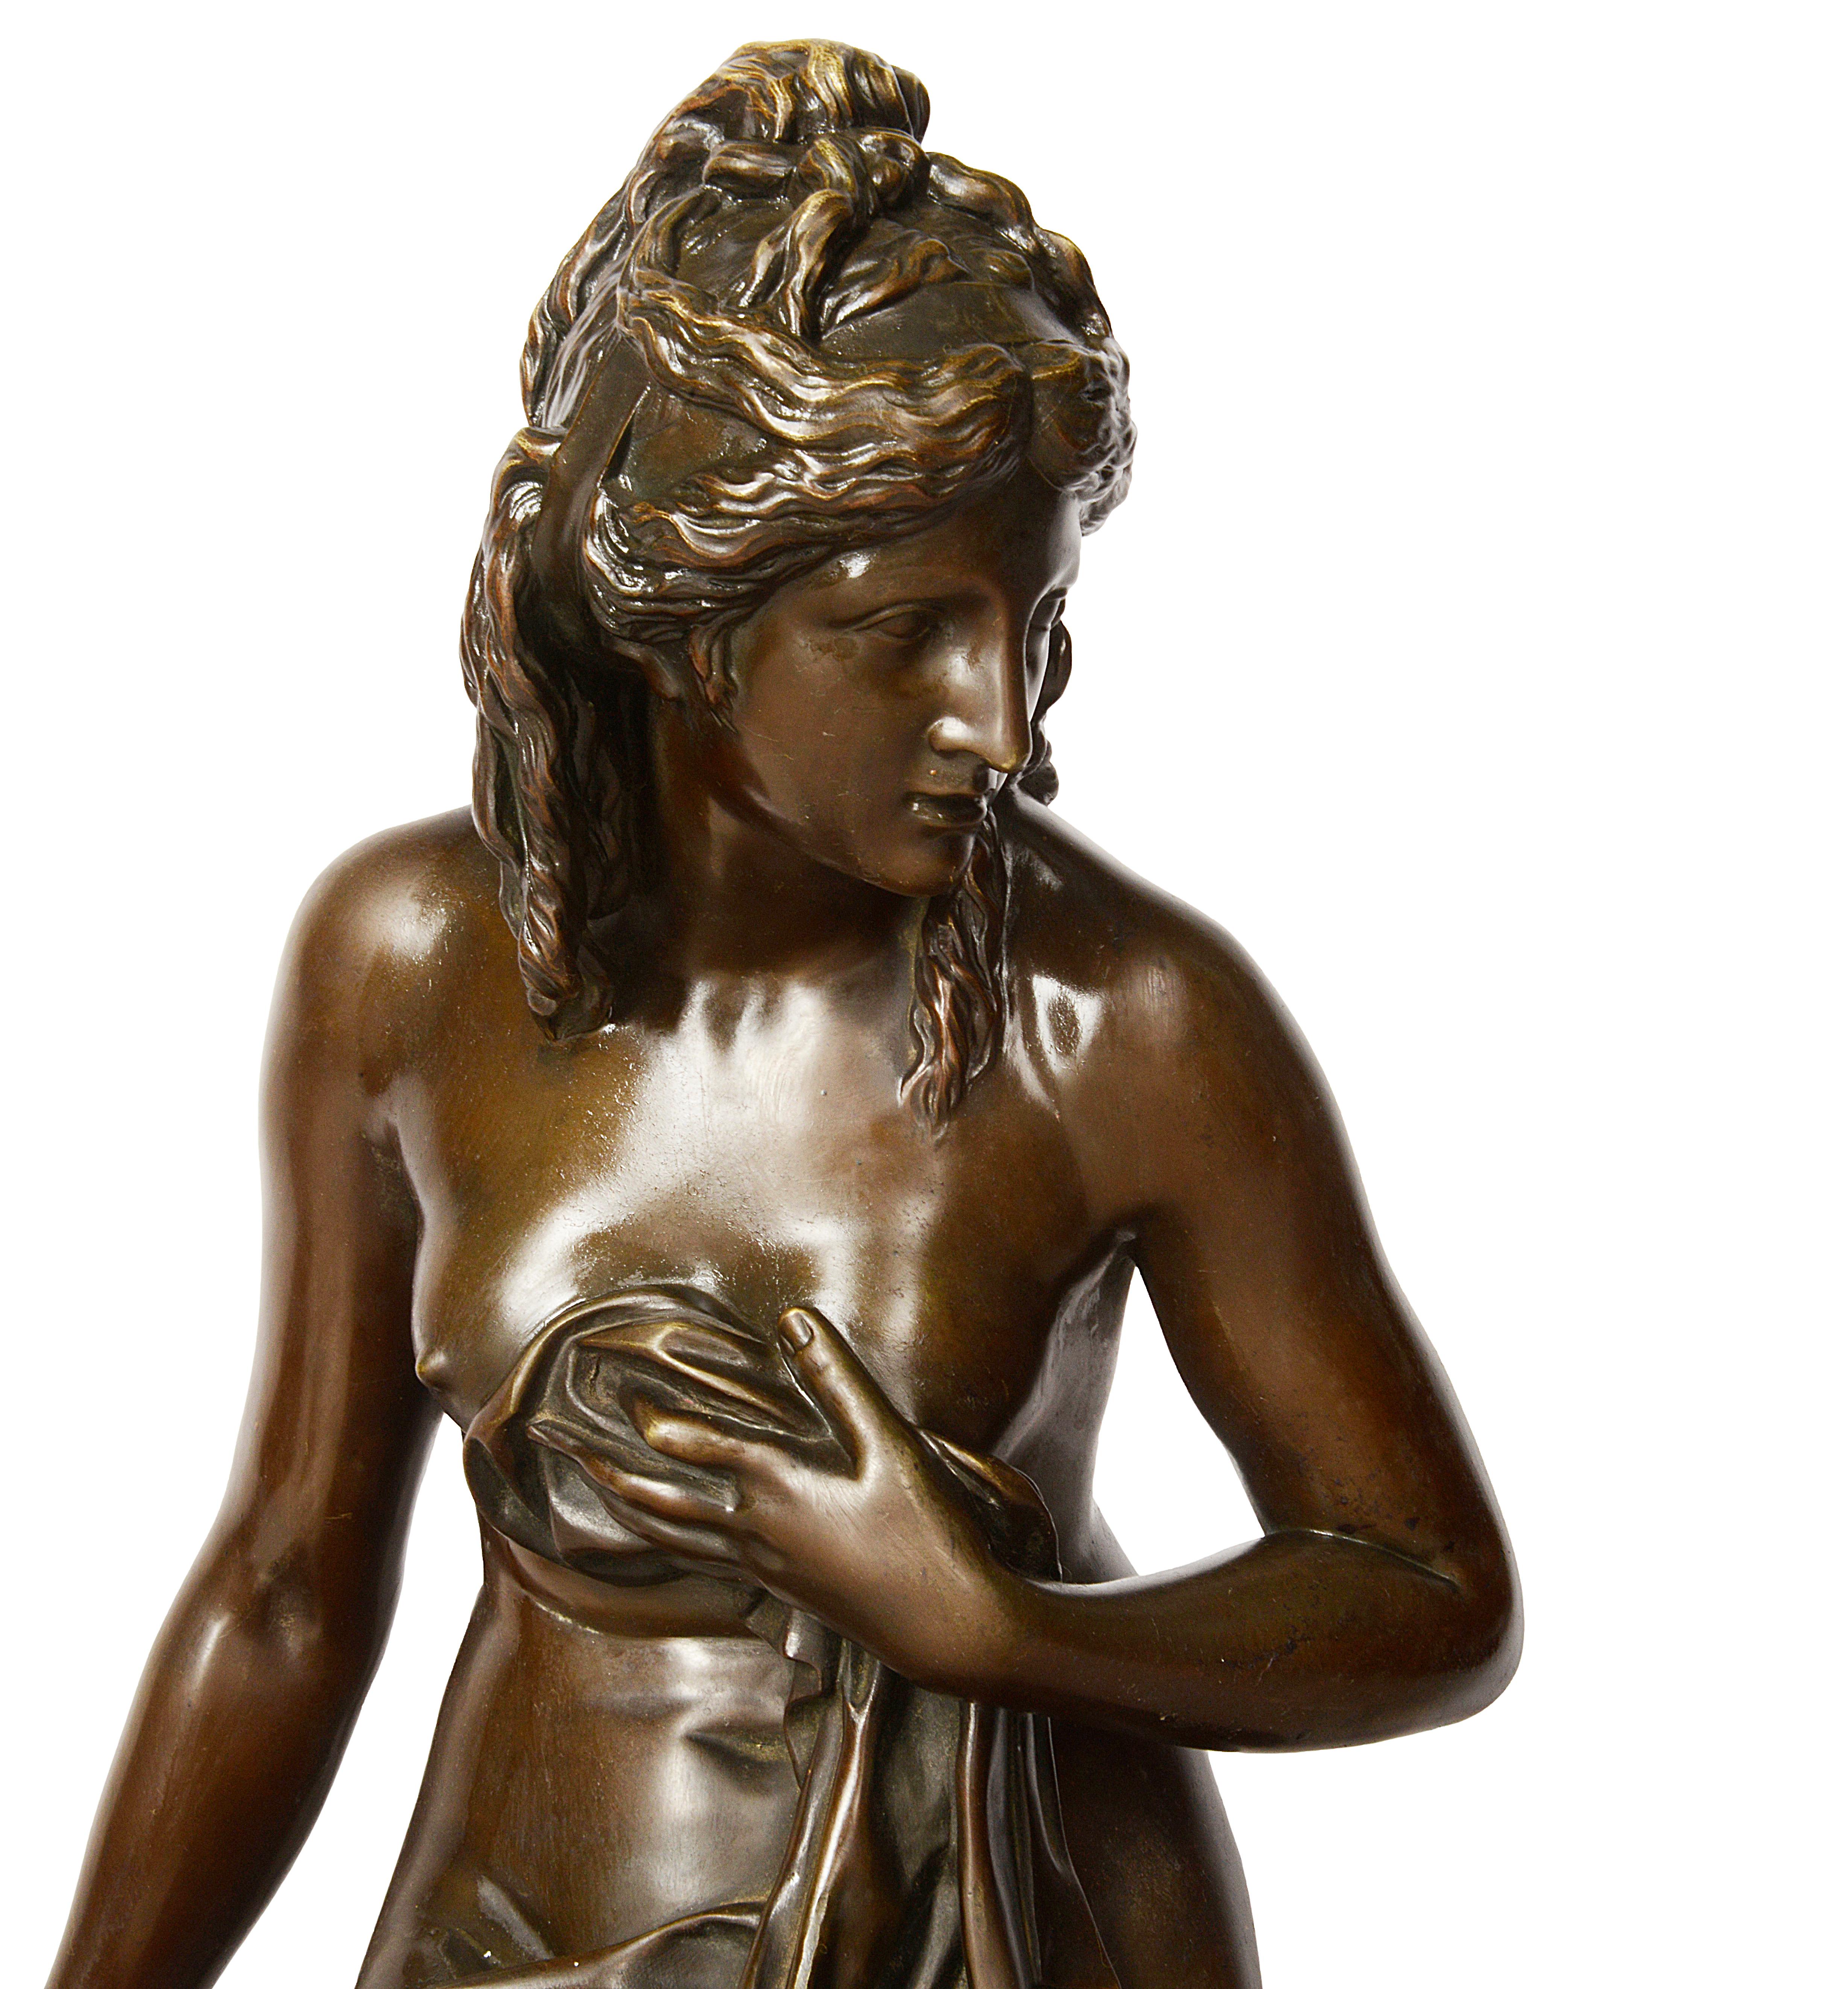 A very good quality large 19th century bronze statue of a semi nude female of Amalthea in Marie Antoinette’s dairy. The original is marble from 1787..

There were different traditions regarding Amaltheia.[3] Amaltheia is sometimes represented as the